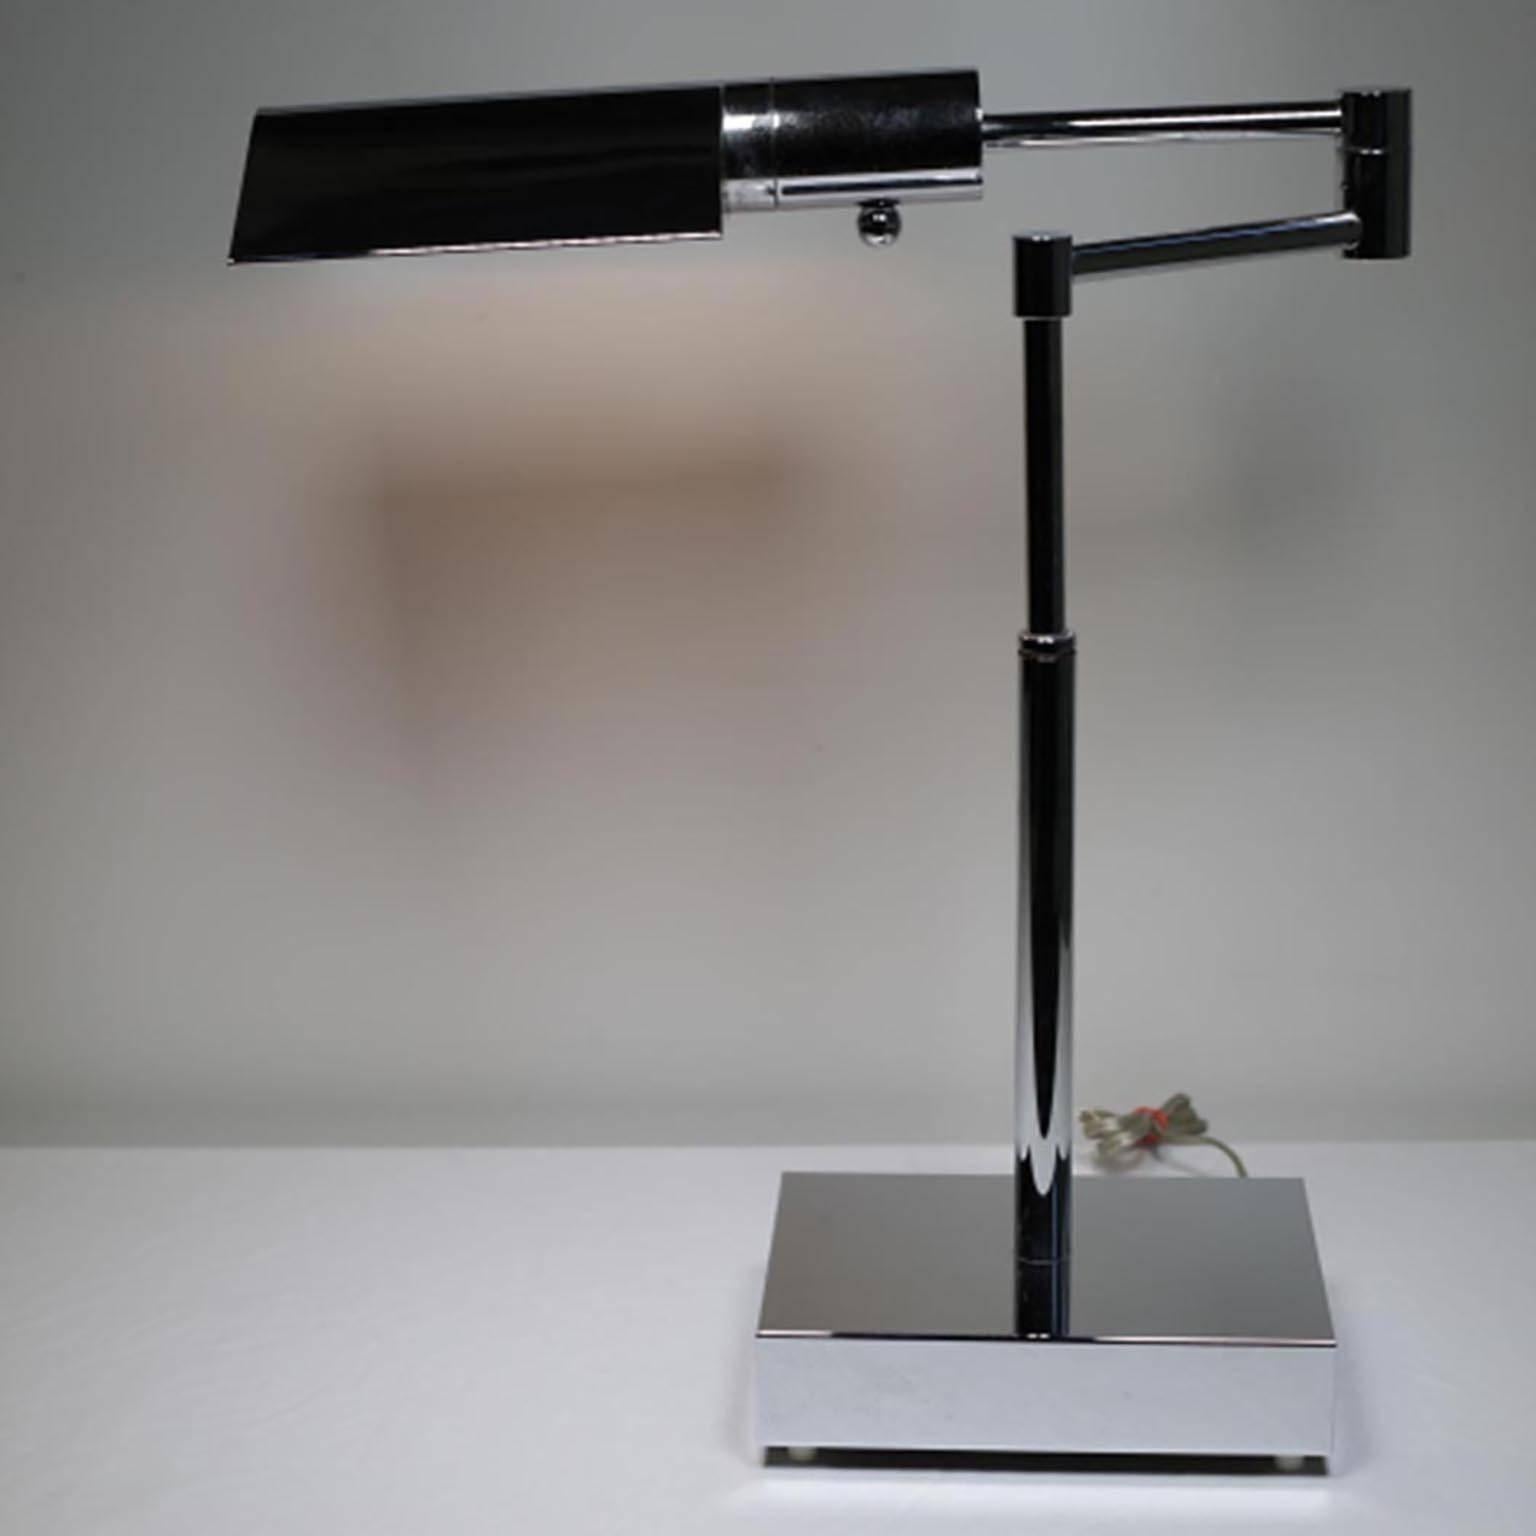 One nickel-plated lamp. The lamp is adjustable and adjust the height of 24